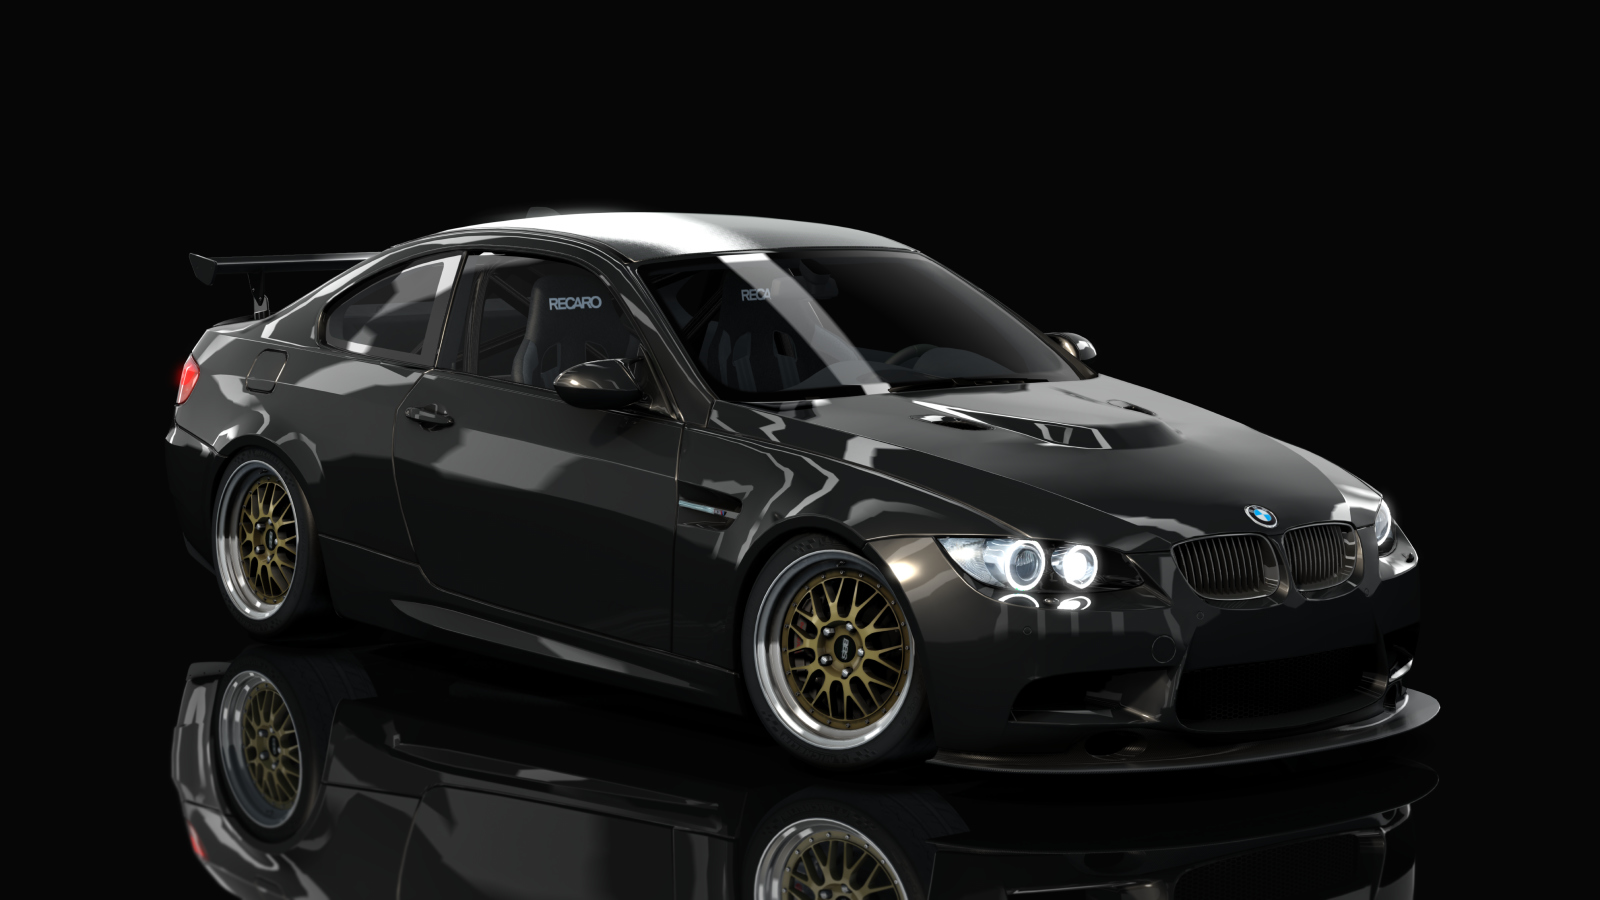 HOTHEAD21 BMW E92 V8 GT (DCT) Preview Image